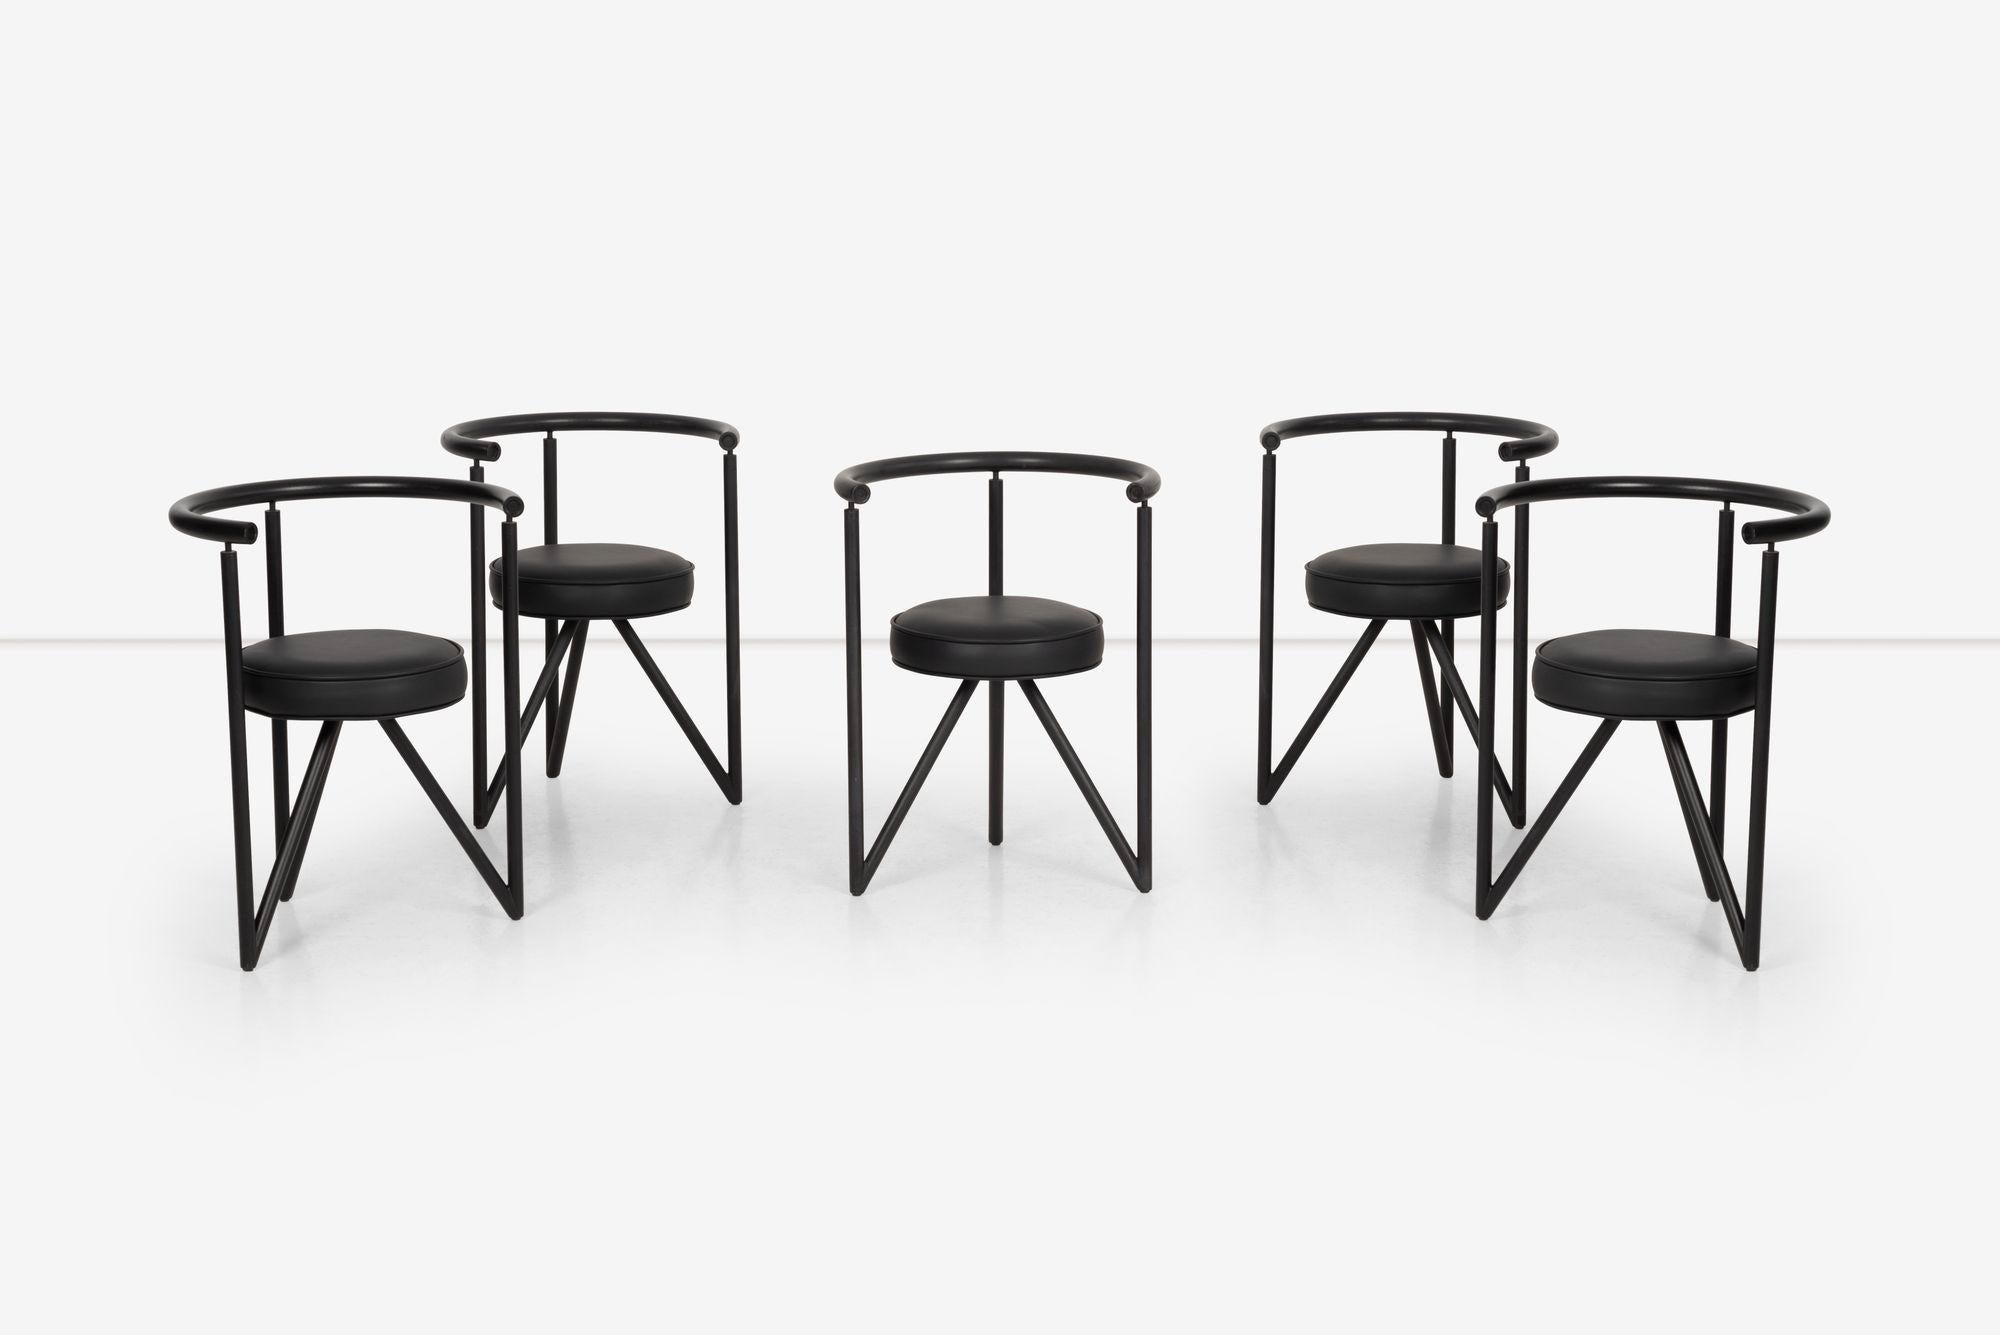 Philippe Starck Miss Dorn Chairs, set of Five by Disform Spain,1982
Enameled steel, upholstery.
seats have been reupholstered in leather
Dimensions:
27.50 height
21 Width
19 Seat Height